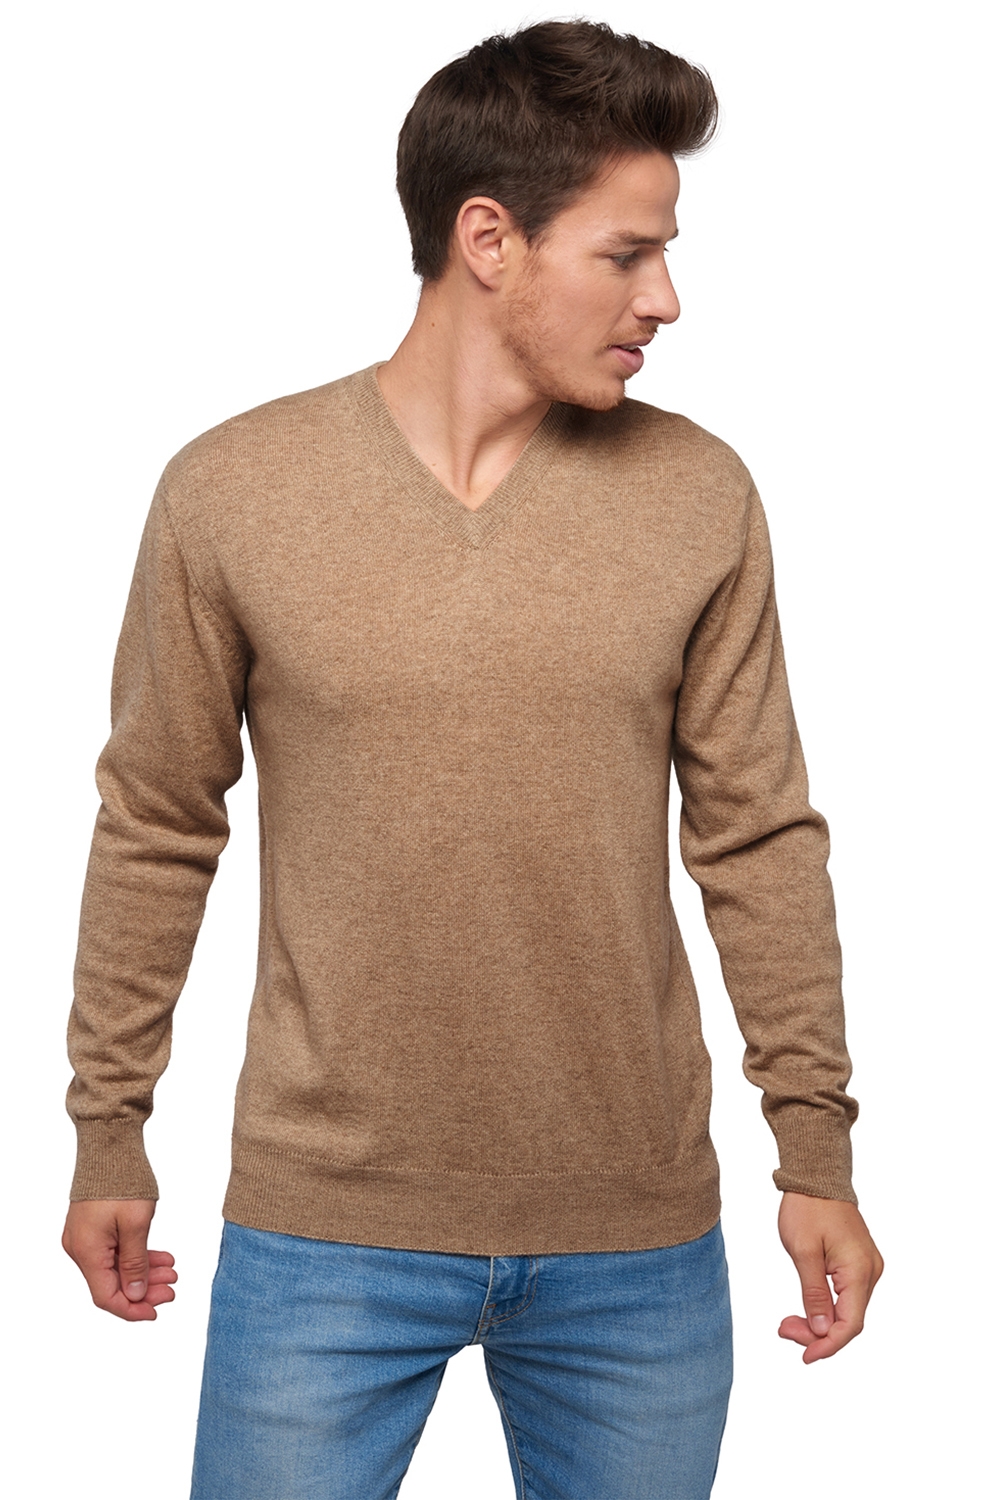 Cachemire Naturel pull homme natural poppy 4f natural brown 2xl